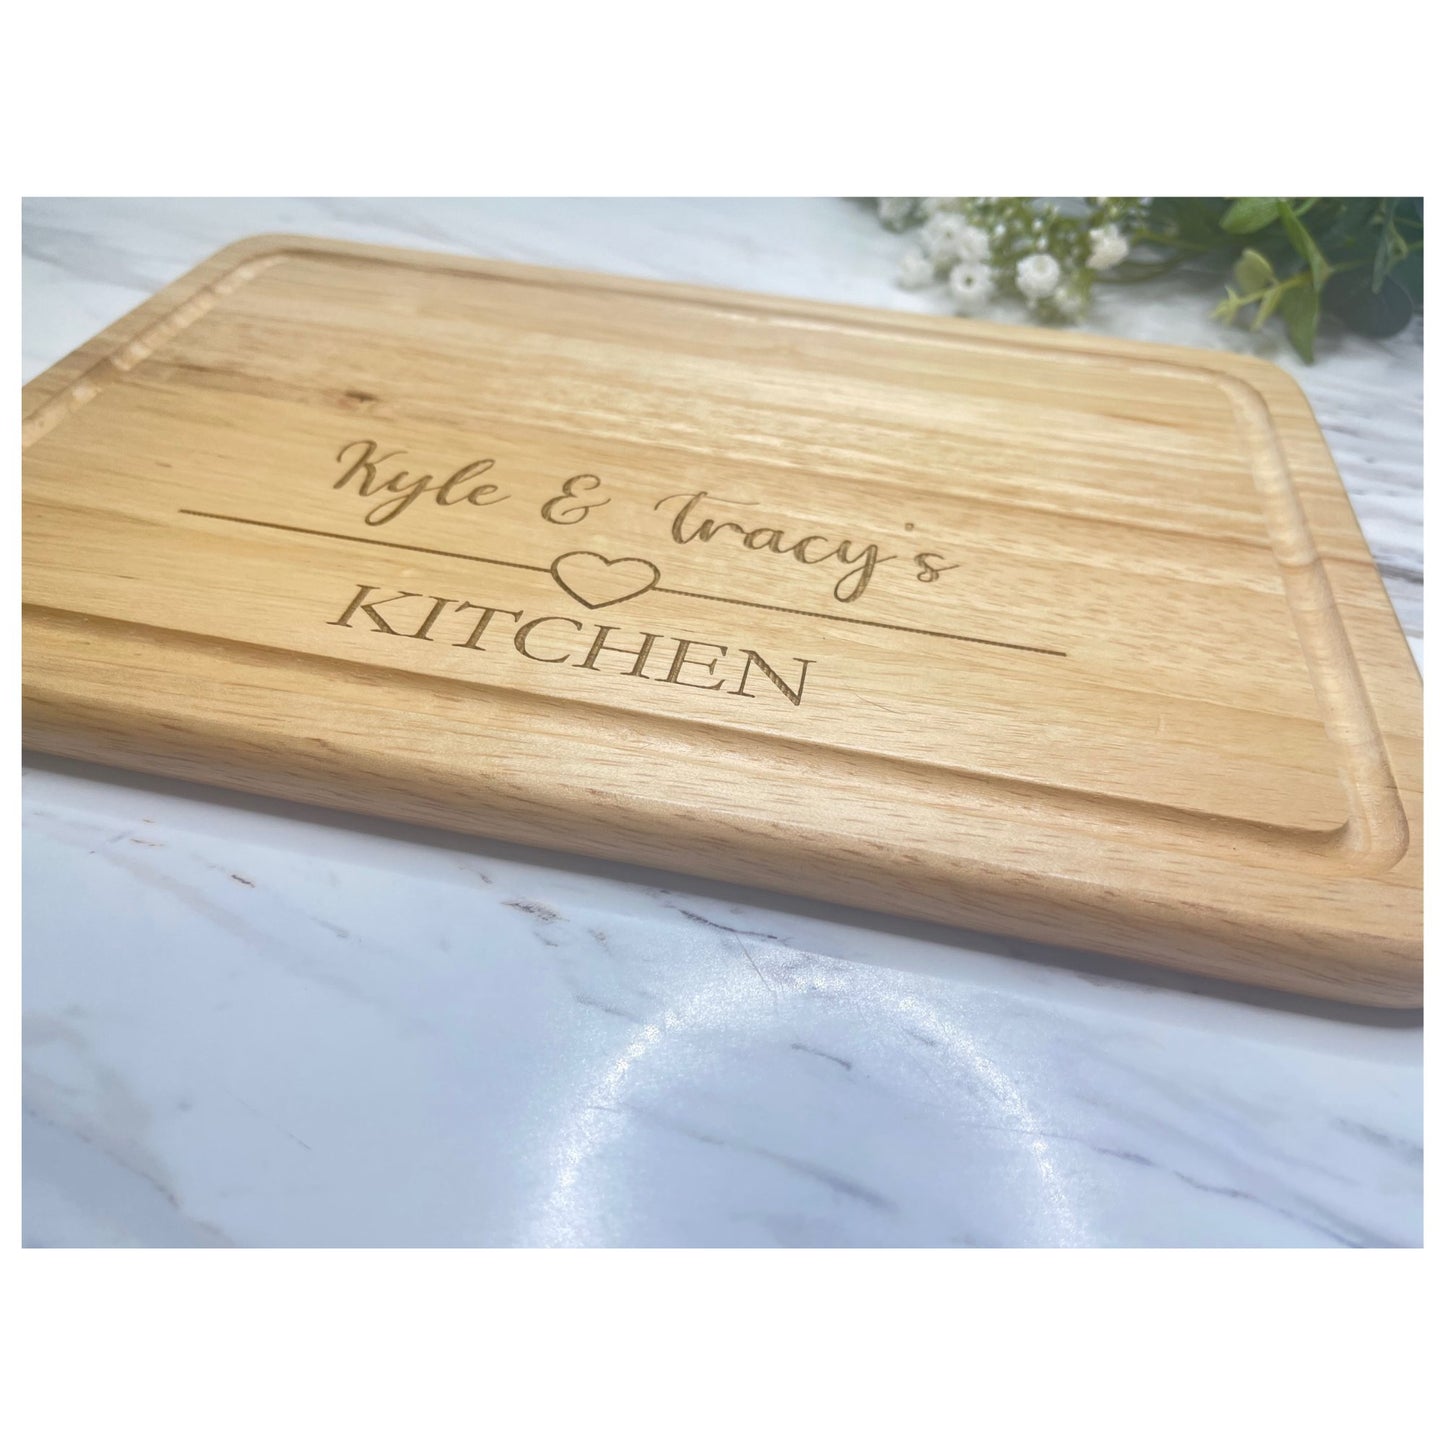 Personalised Wooden Chopping Board - Straight Heart Design